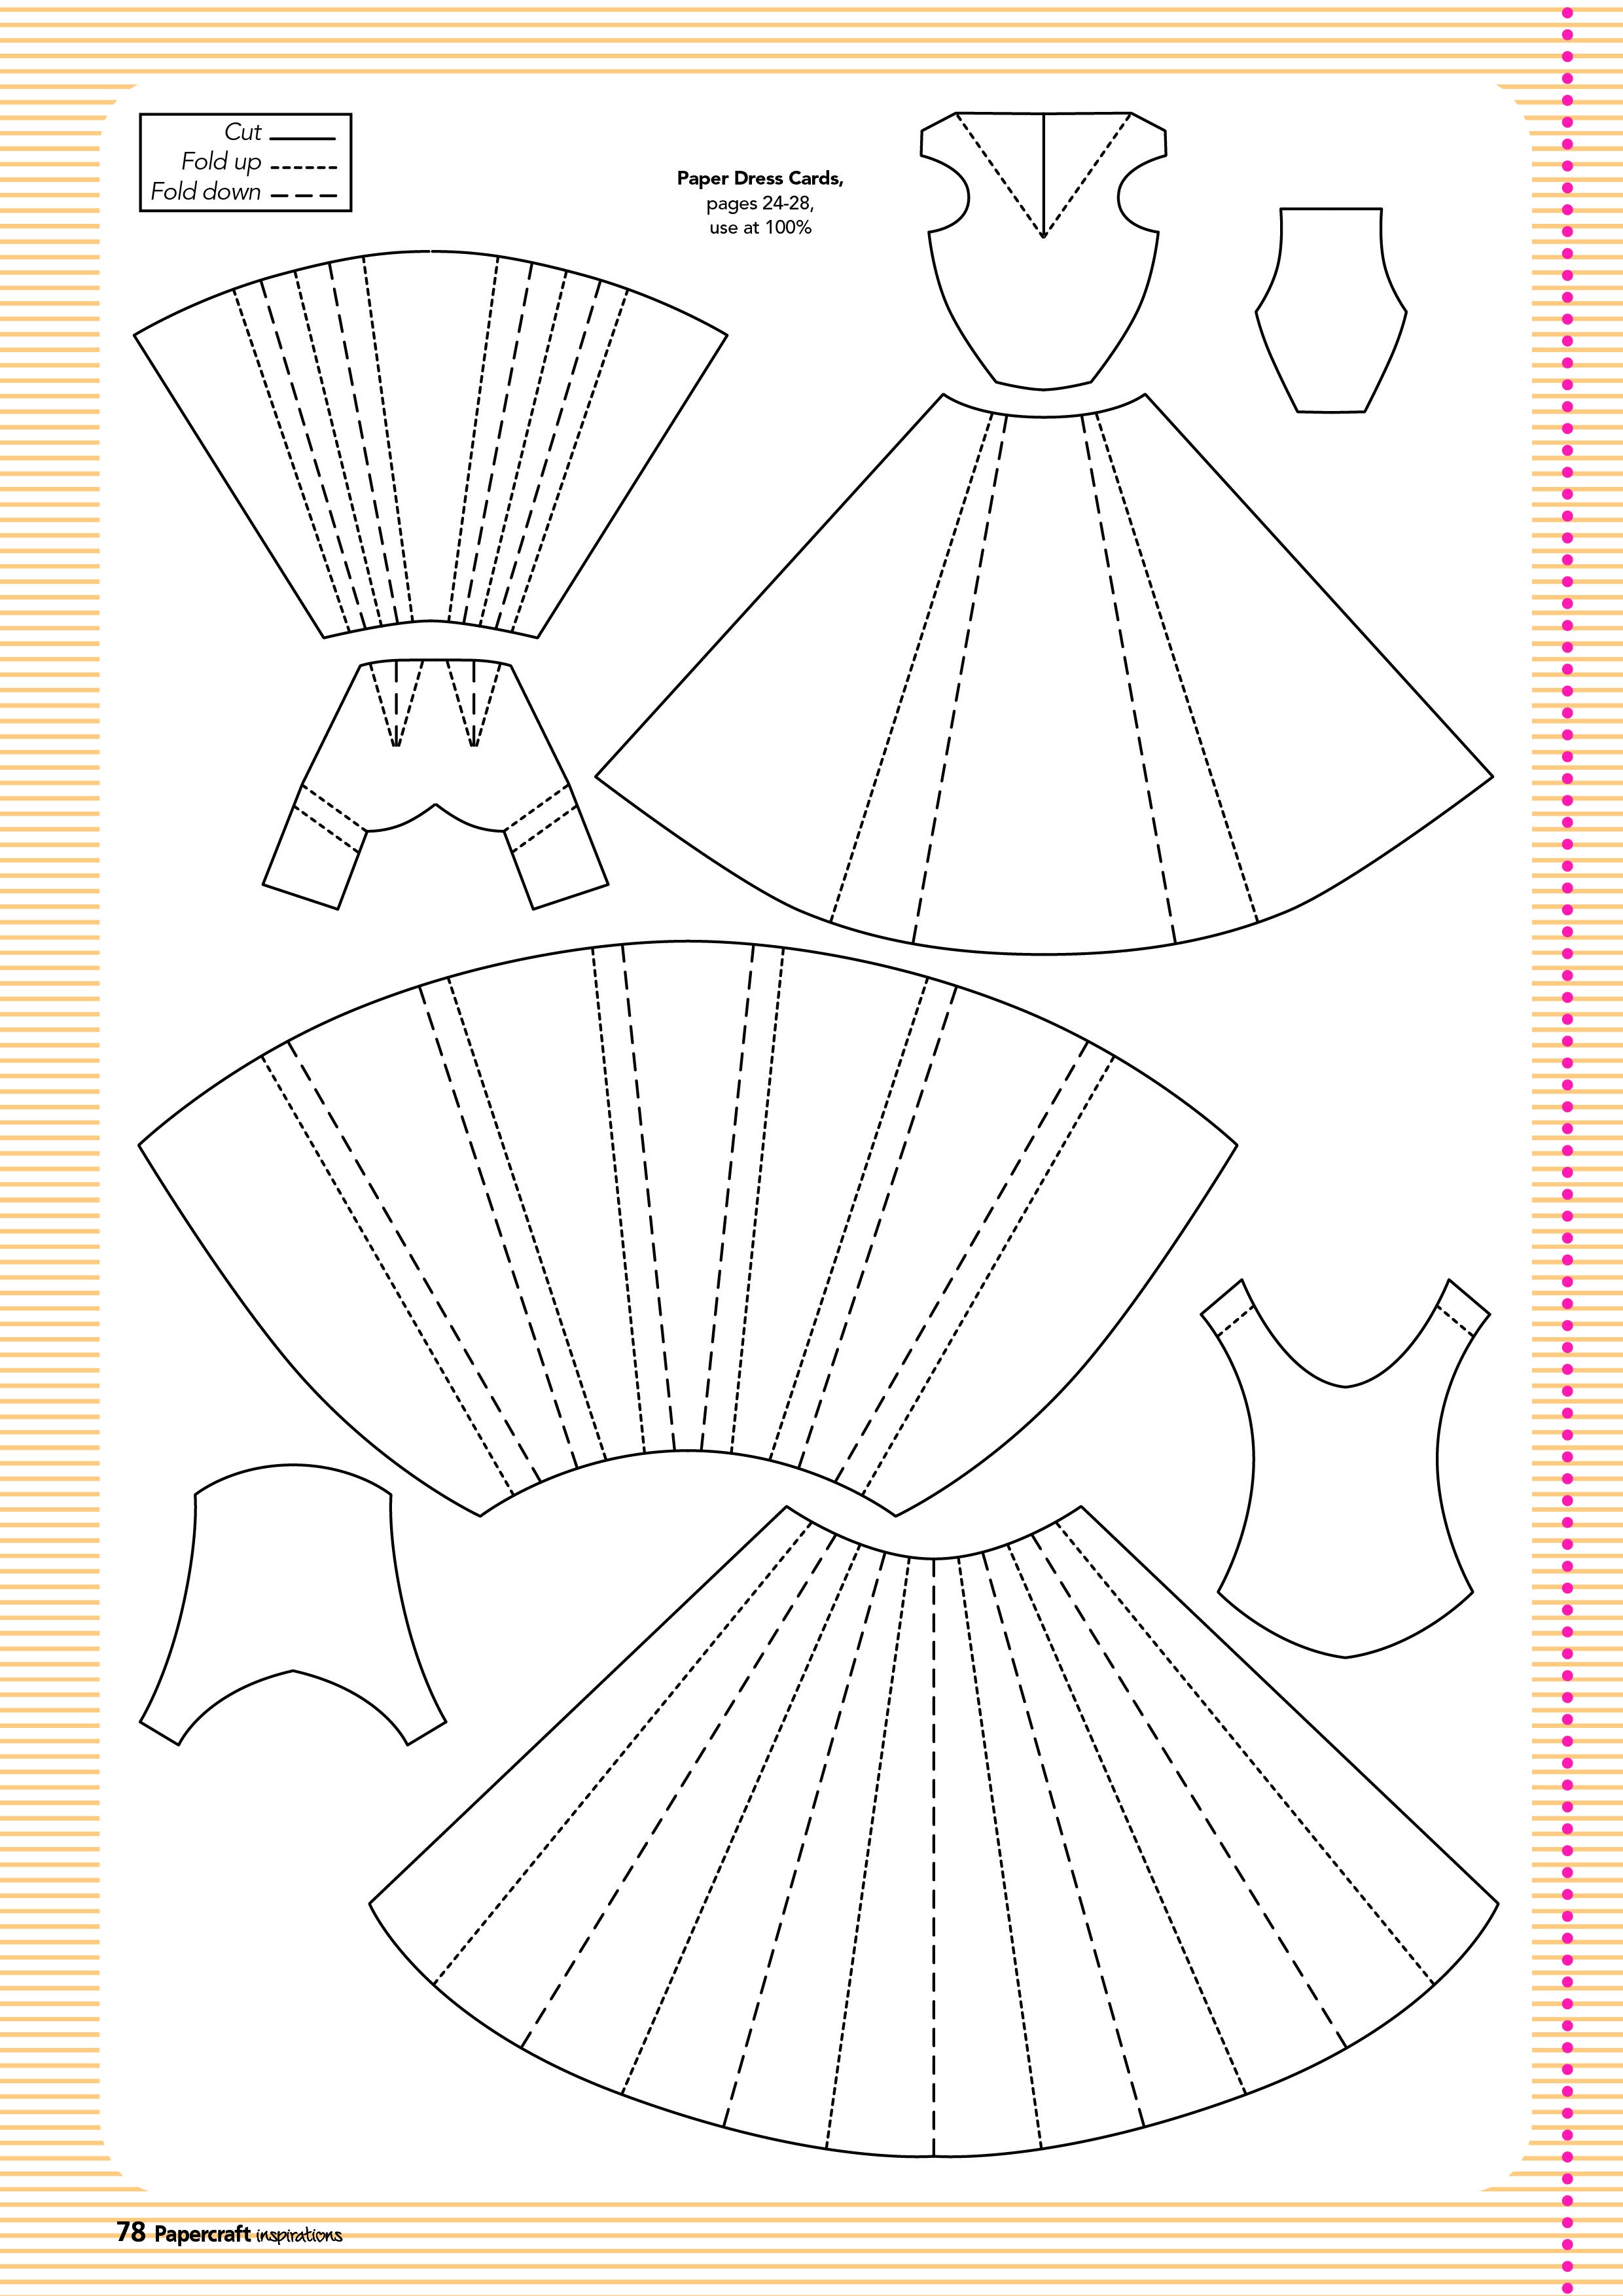 Free Templates From Papercraft Inspirations 129 | Card Design - Free Card Making Templates Printable